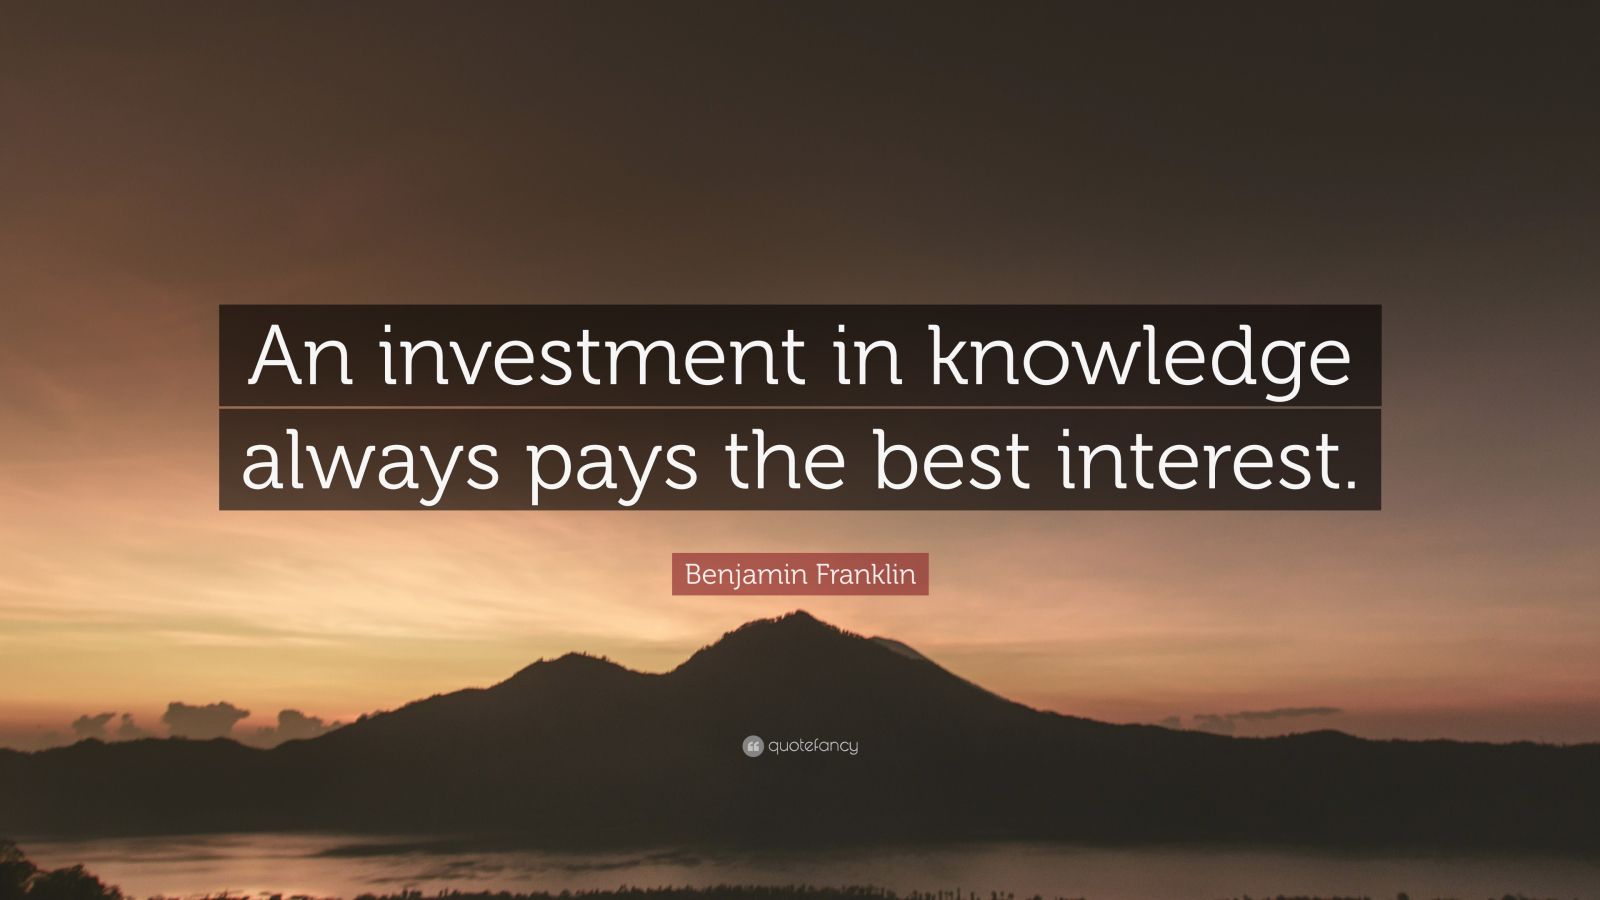 Benjamin Franklin Quote: “An investment in knowledge always pays the